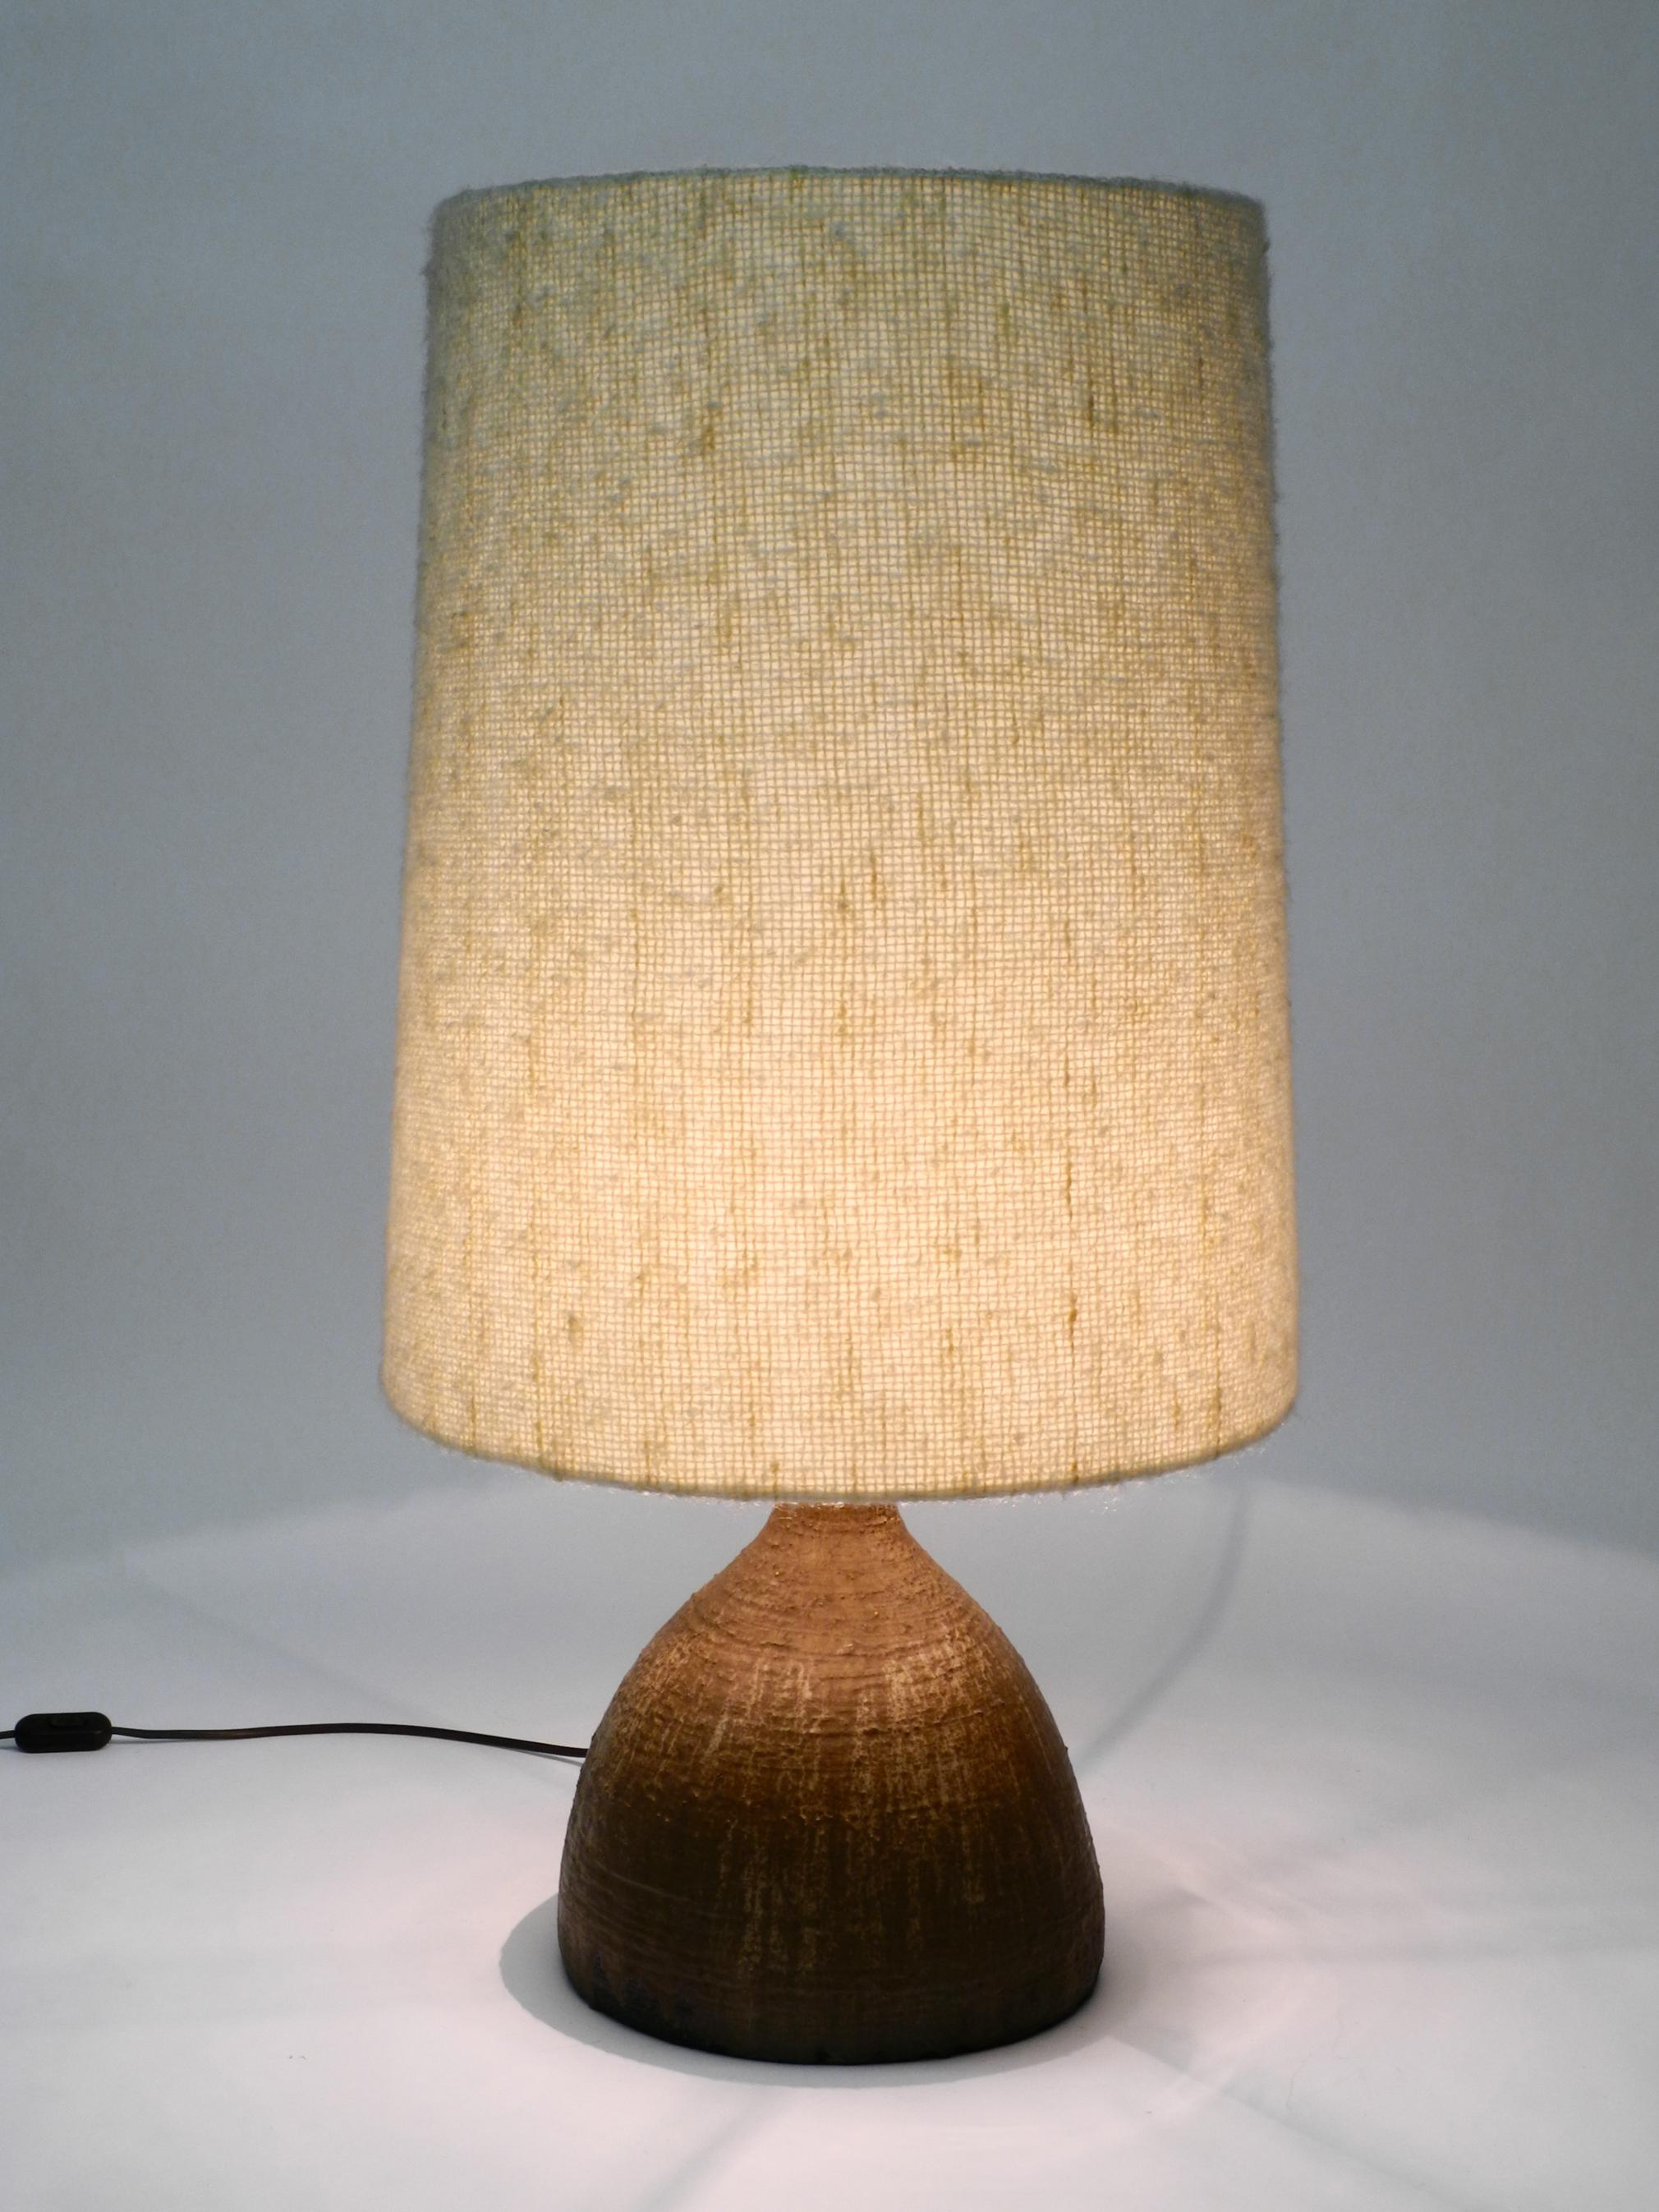 Very rare, huge 1960s German ceramic table or floor lamp with a large fabric shade.
Heavy, large artful ceramic foot in mocha brown.
The original shade is made of a beige fabric shade that has the feel of wool.
Very high quality workmanship.
No